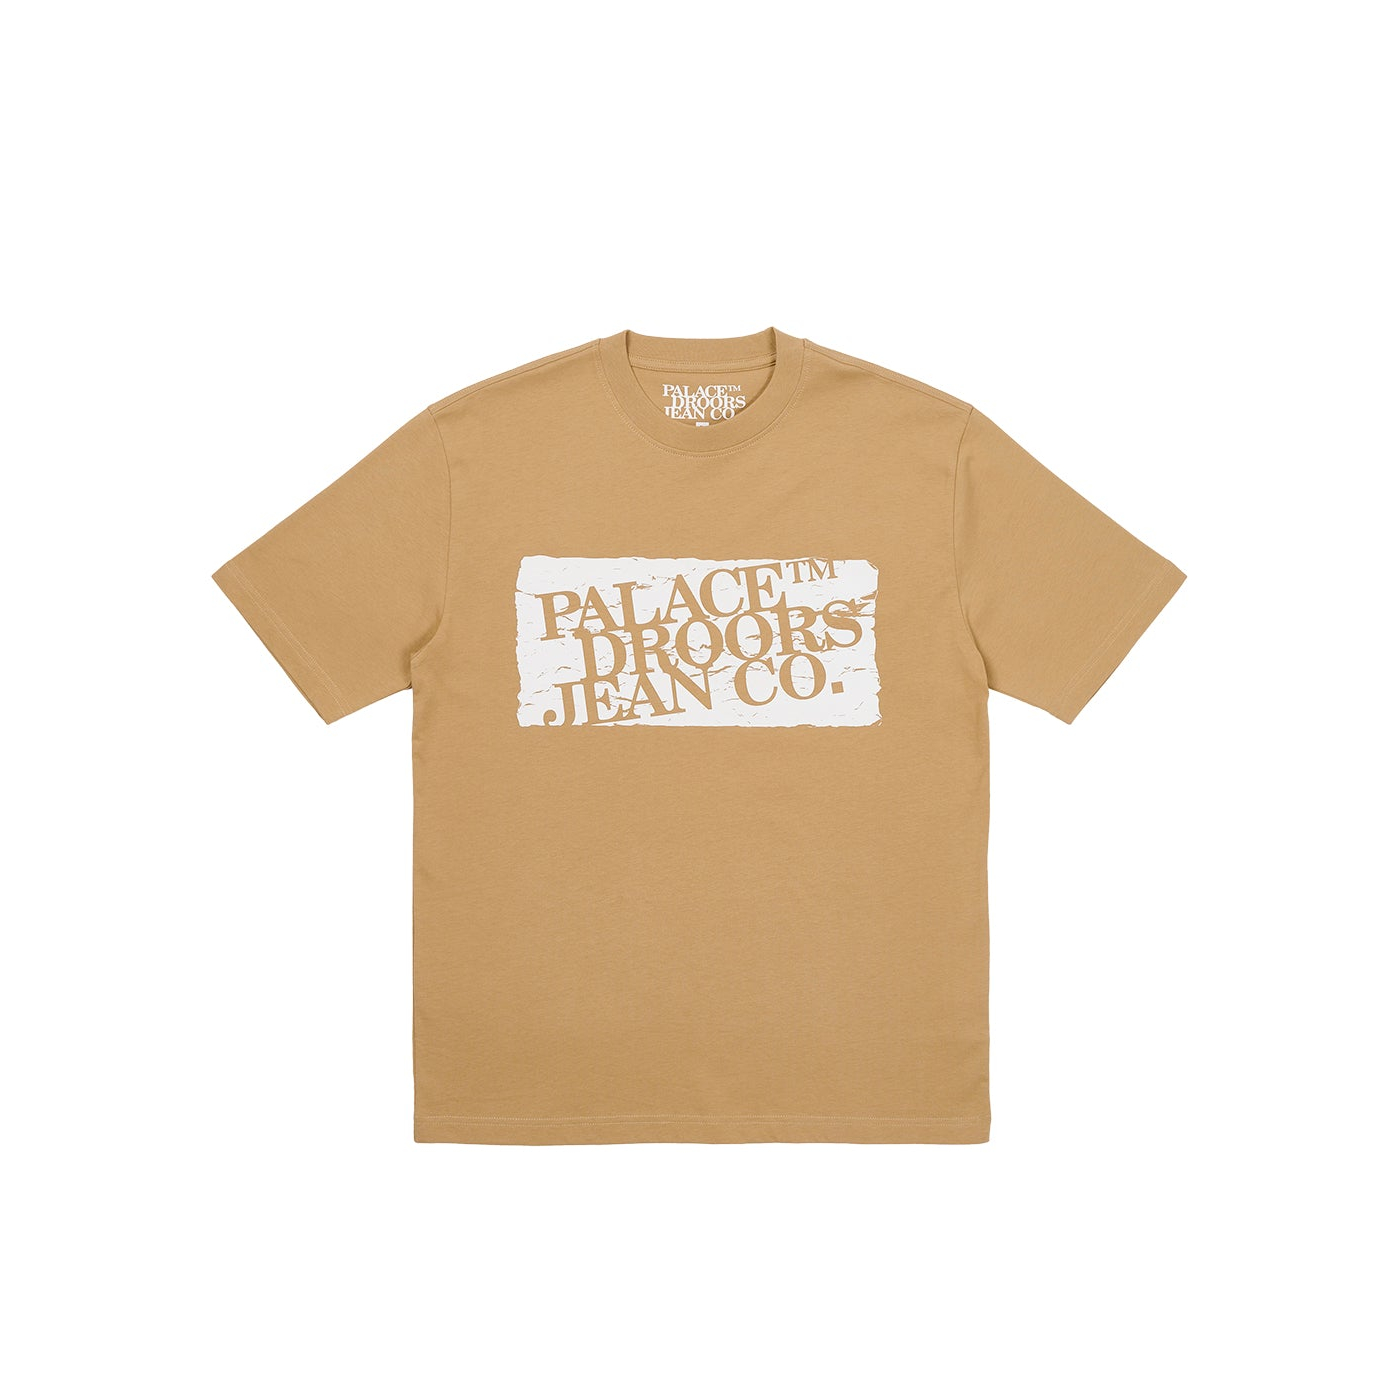 Thumbnail PALACE DROORS T-SHIRT SAND one color